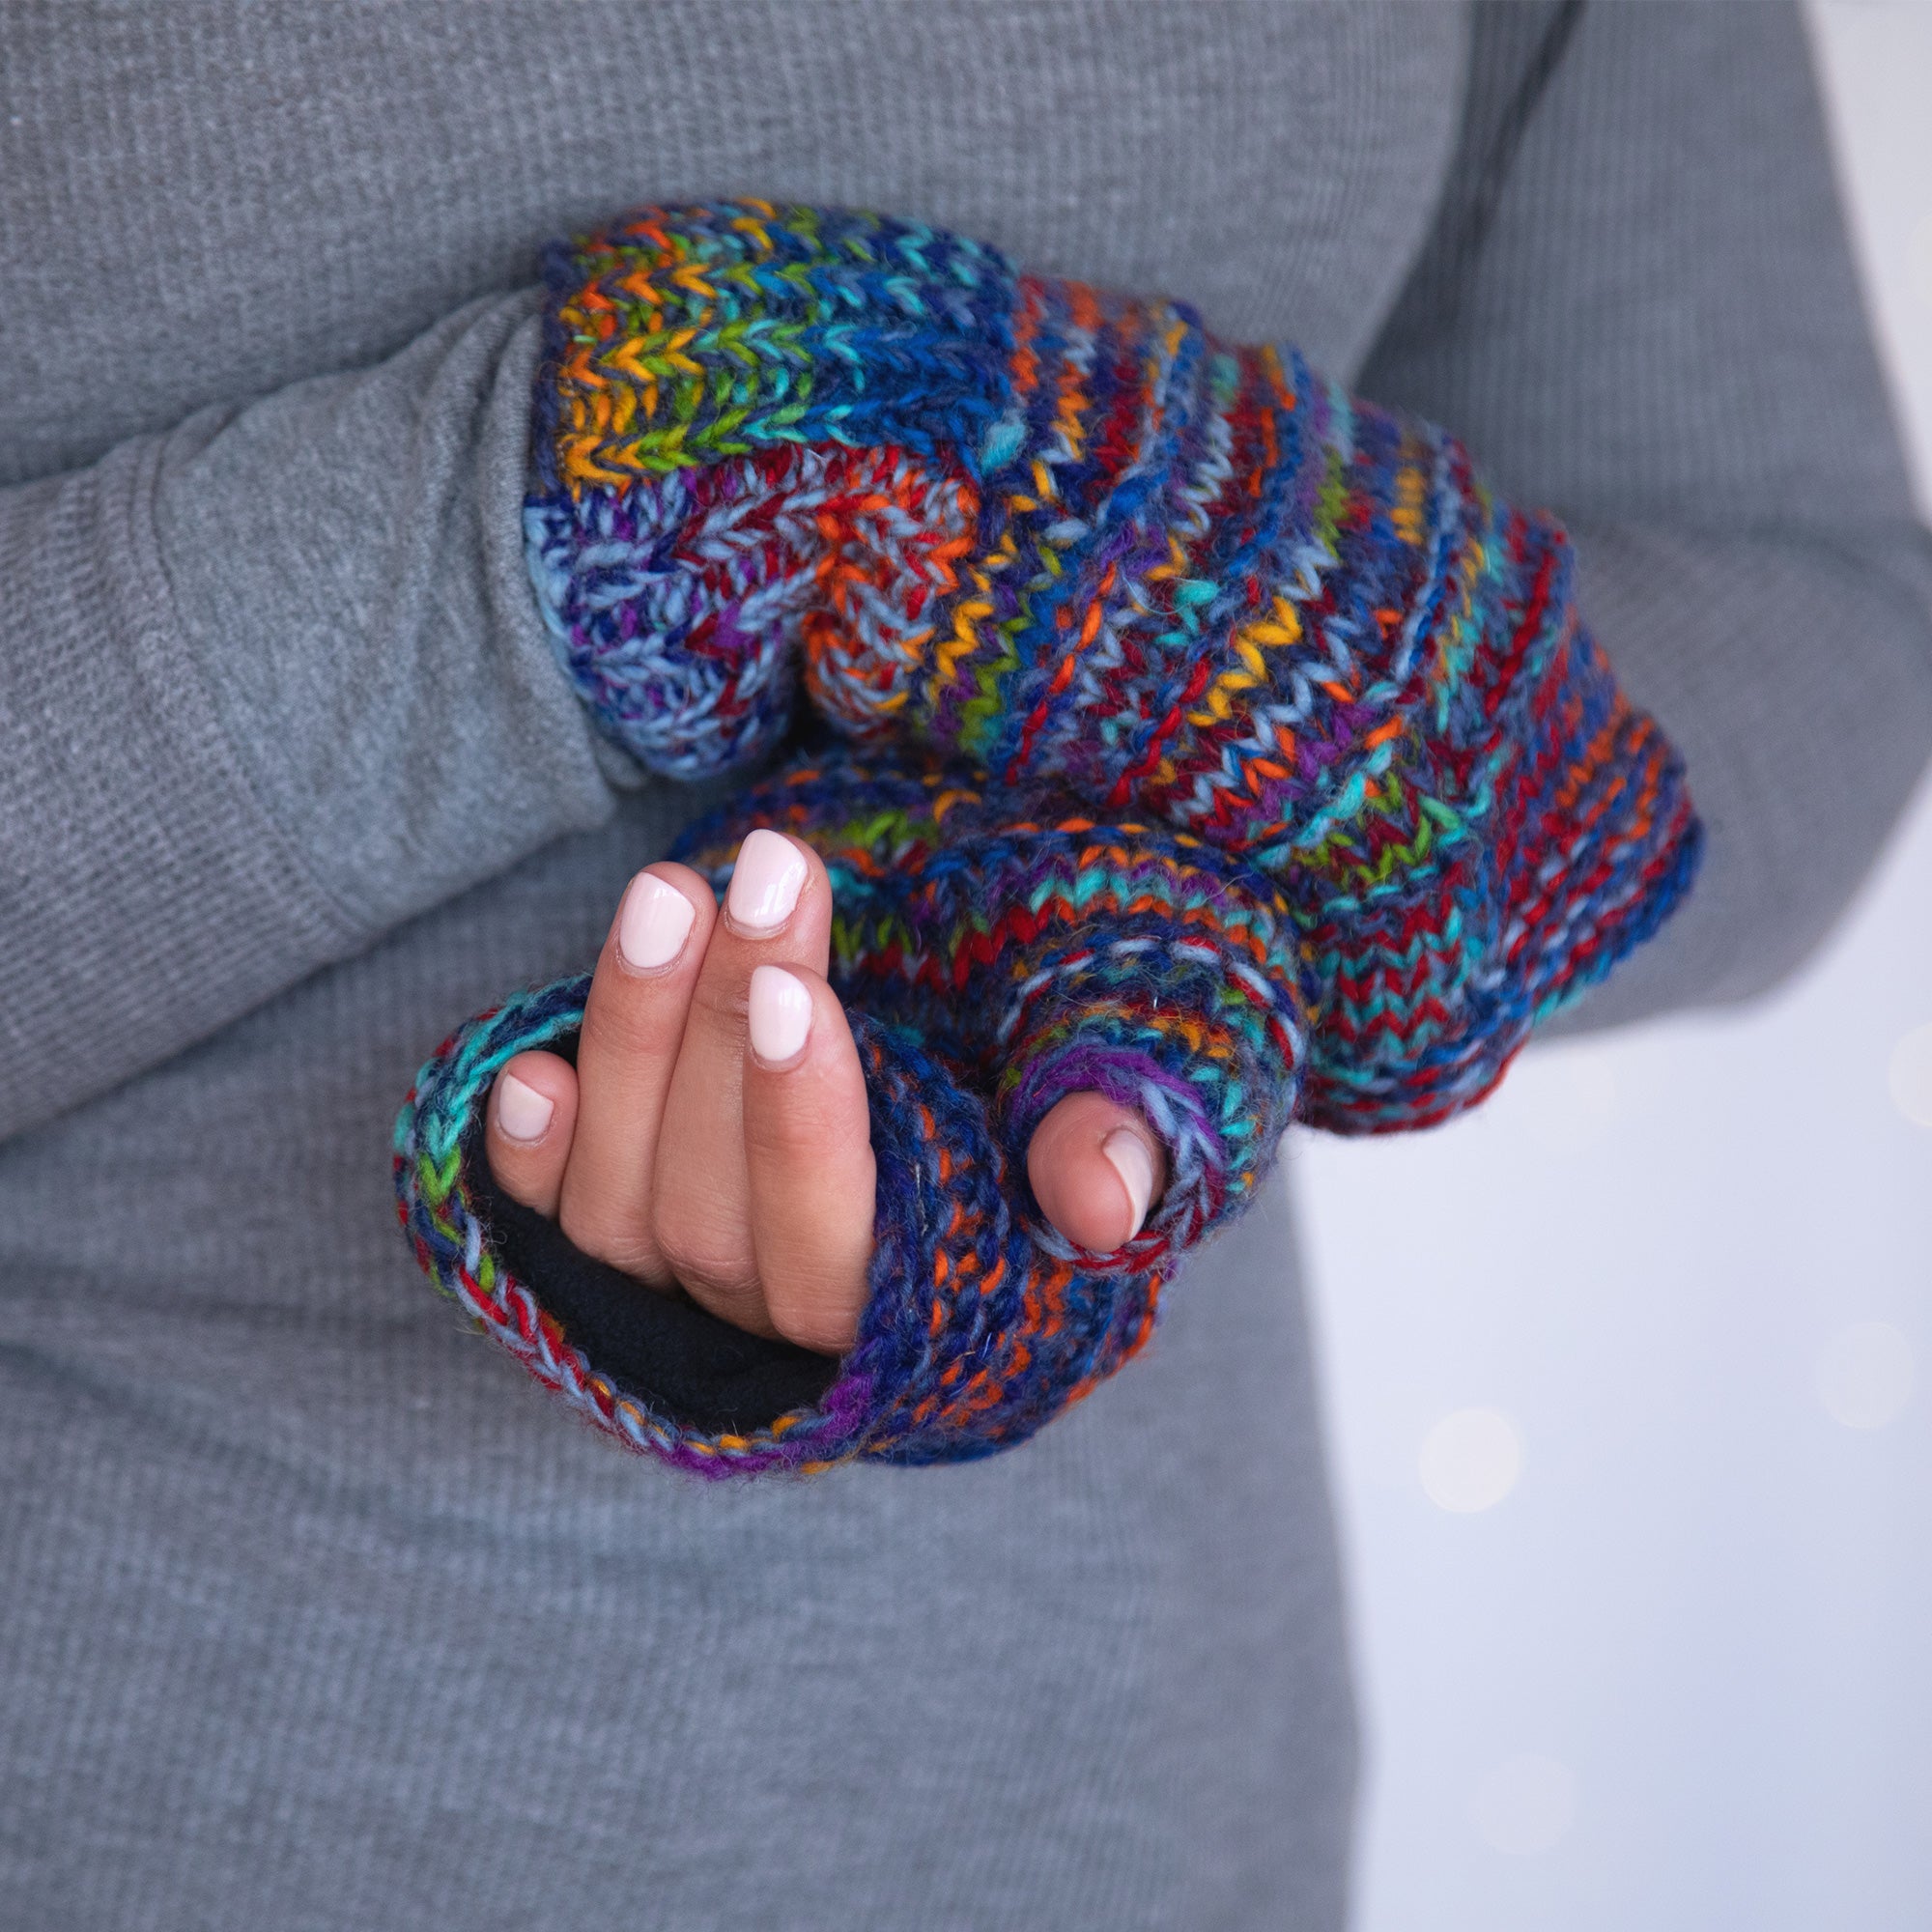 Space-Dye Hand Knit Wool Hand Warmers - Natural